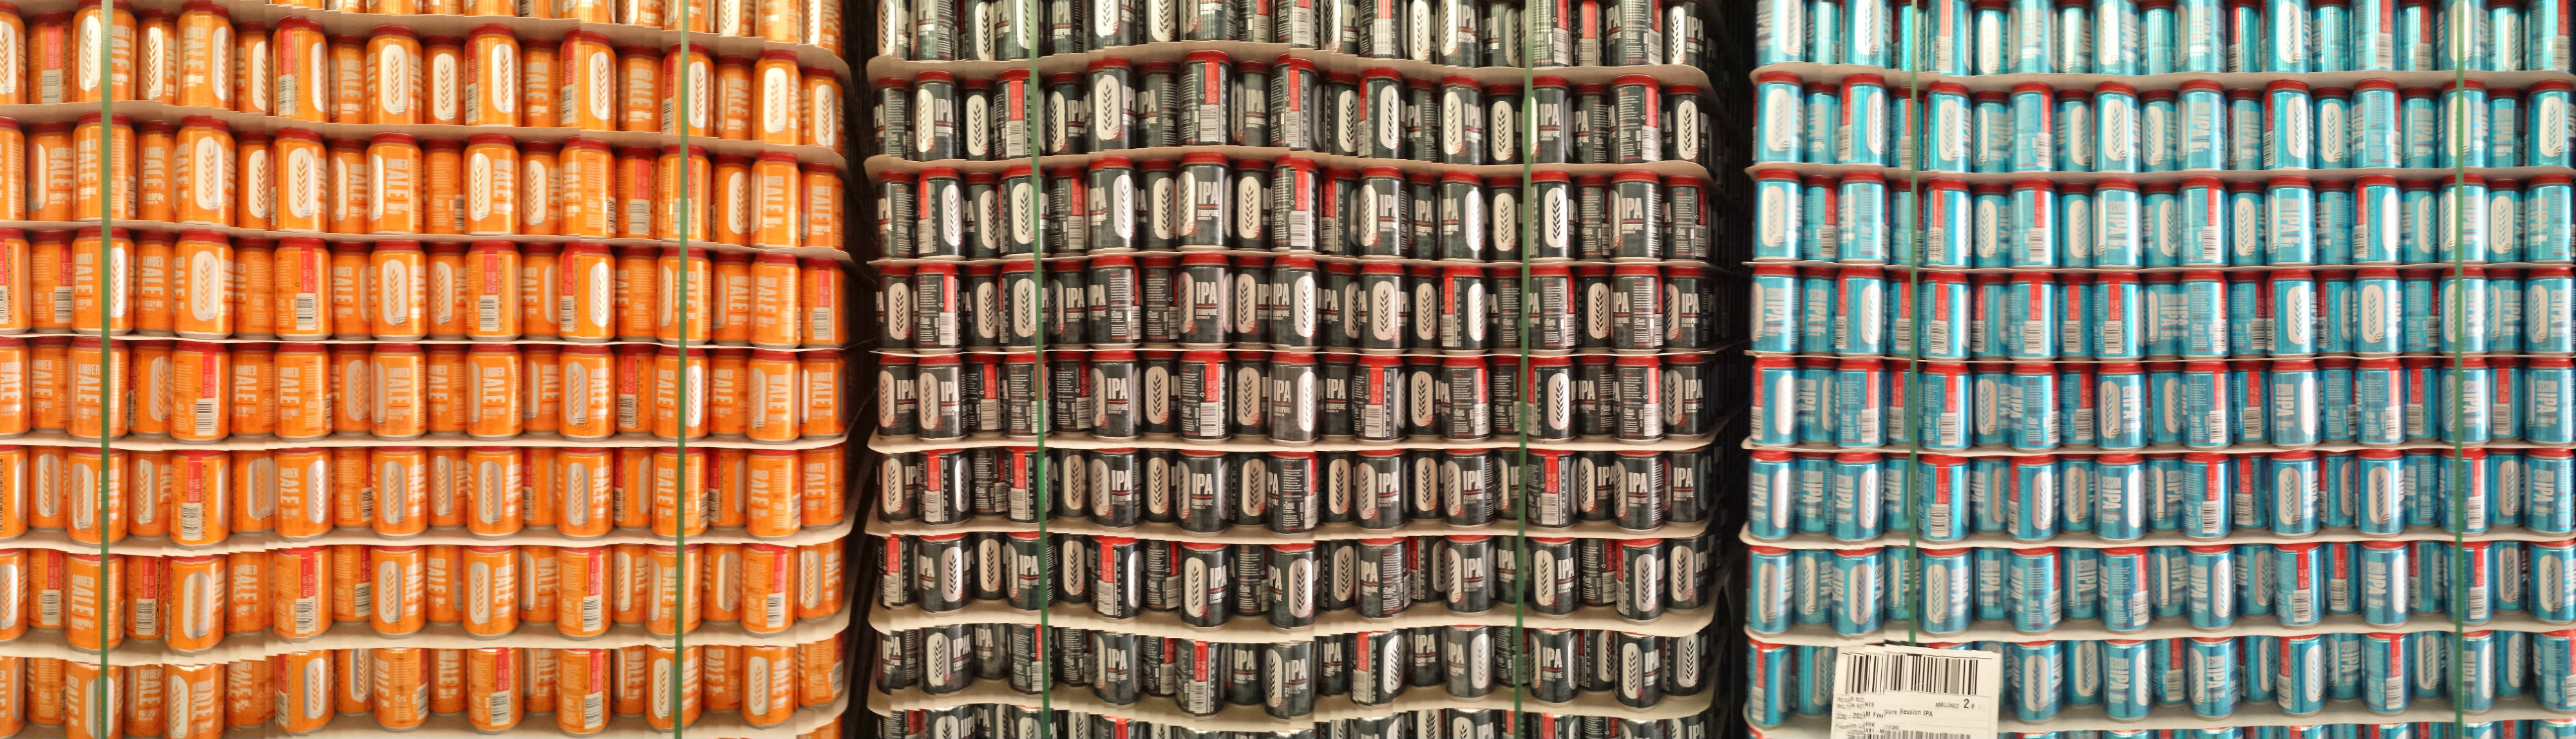 pissup in a brewery beer cans